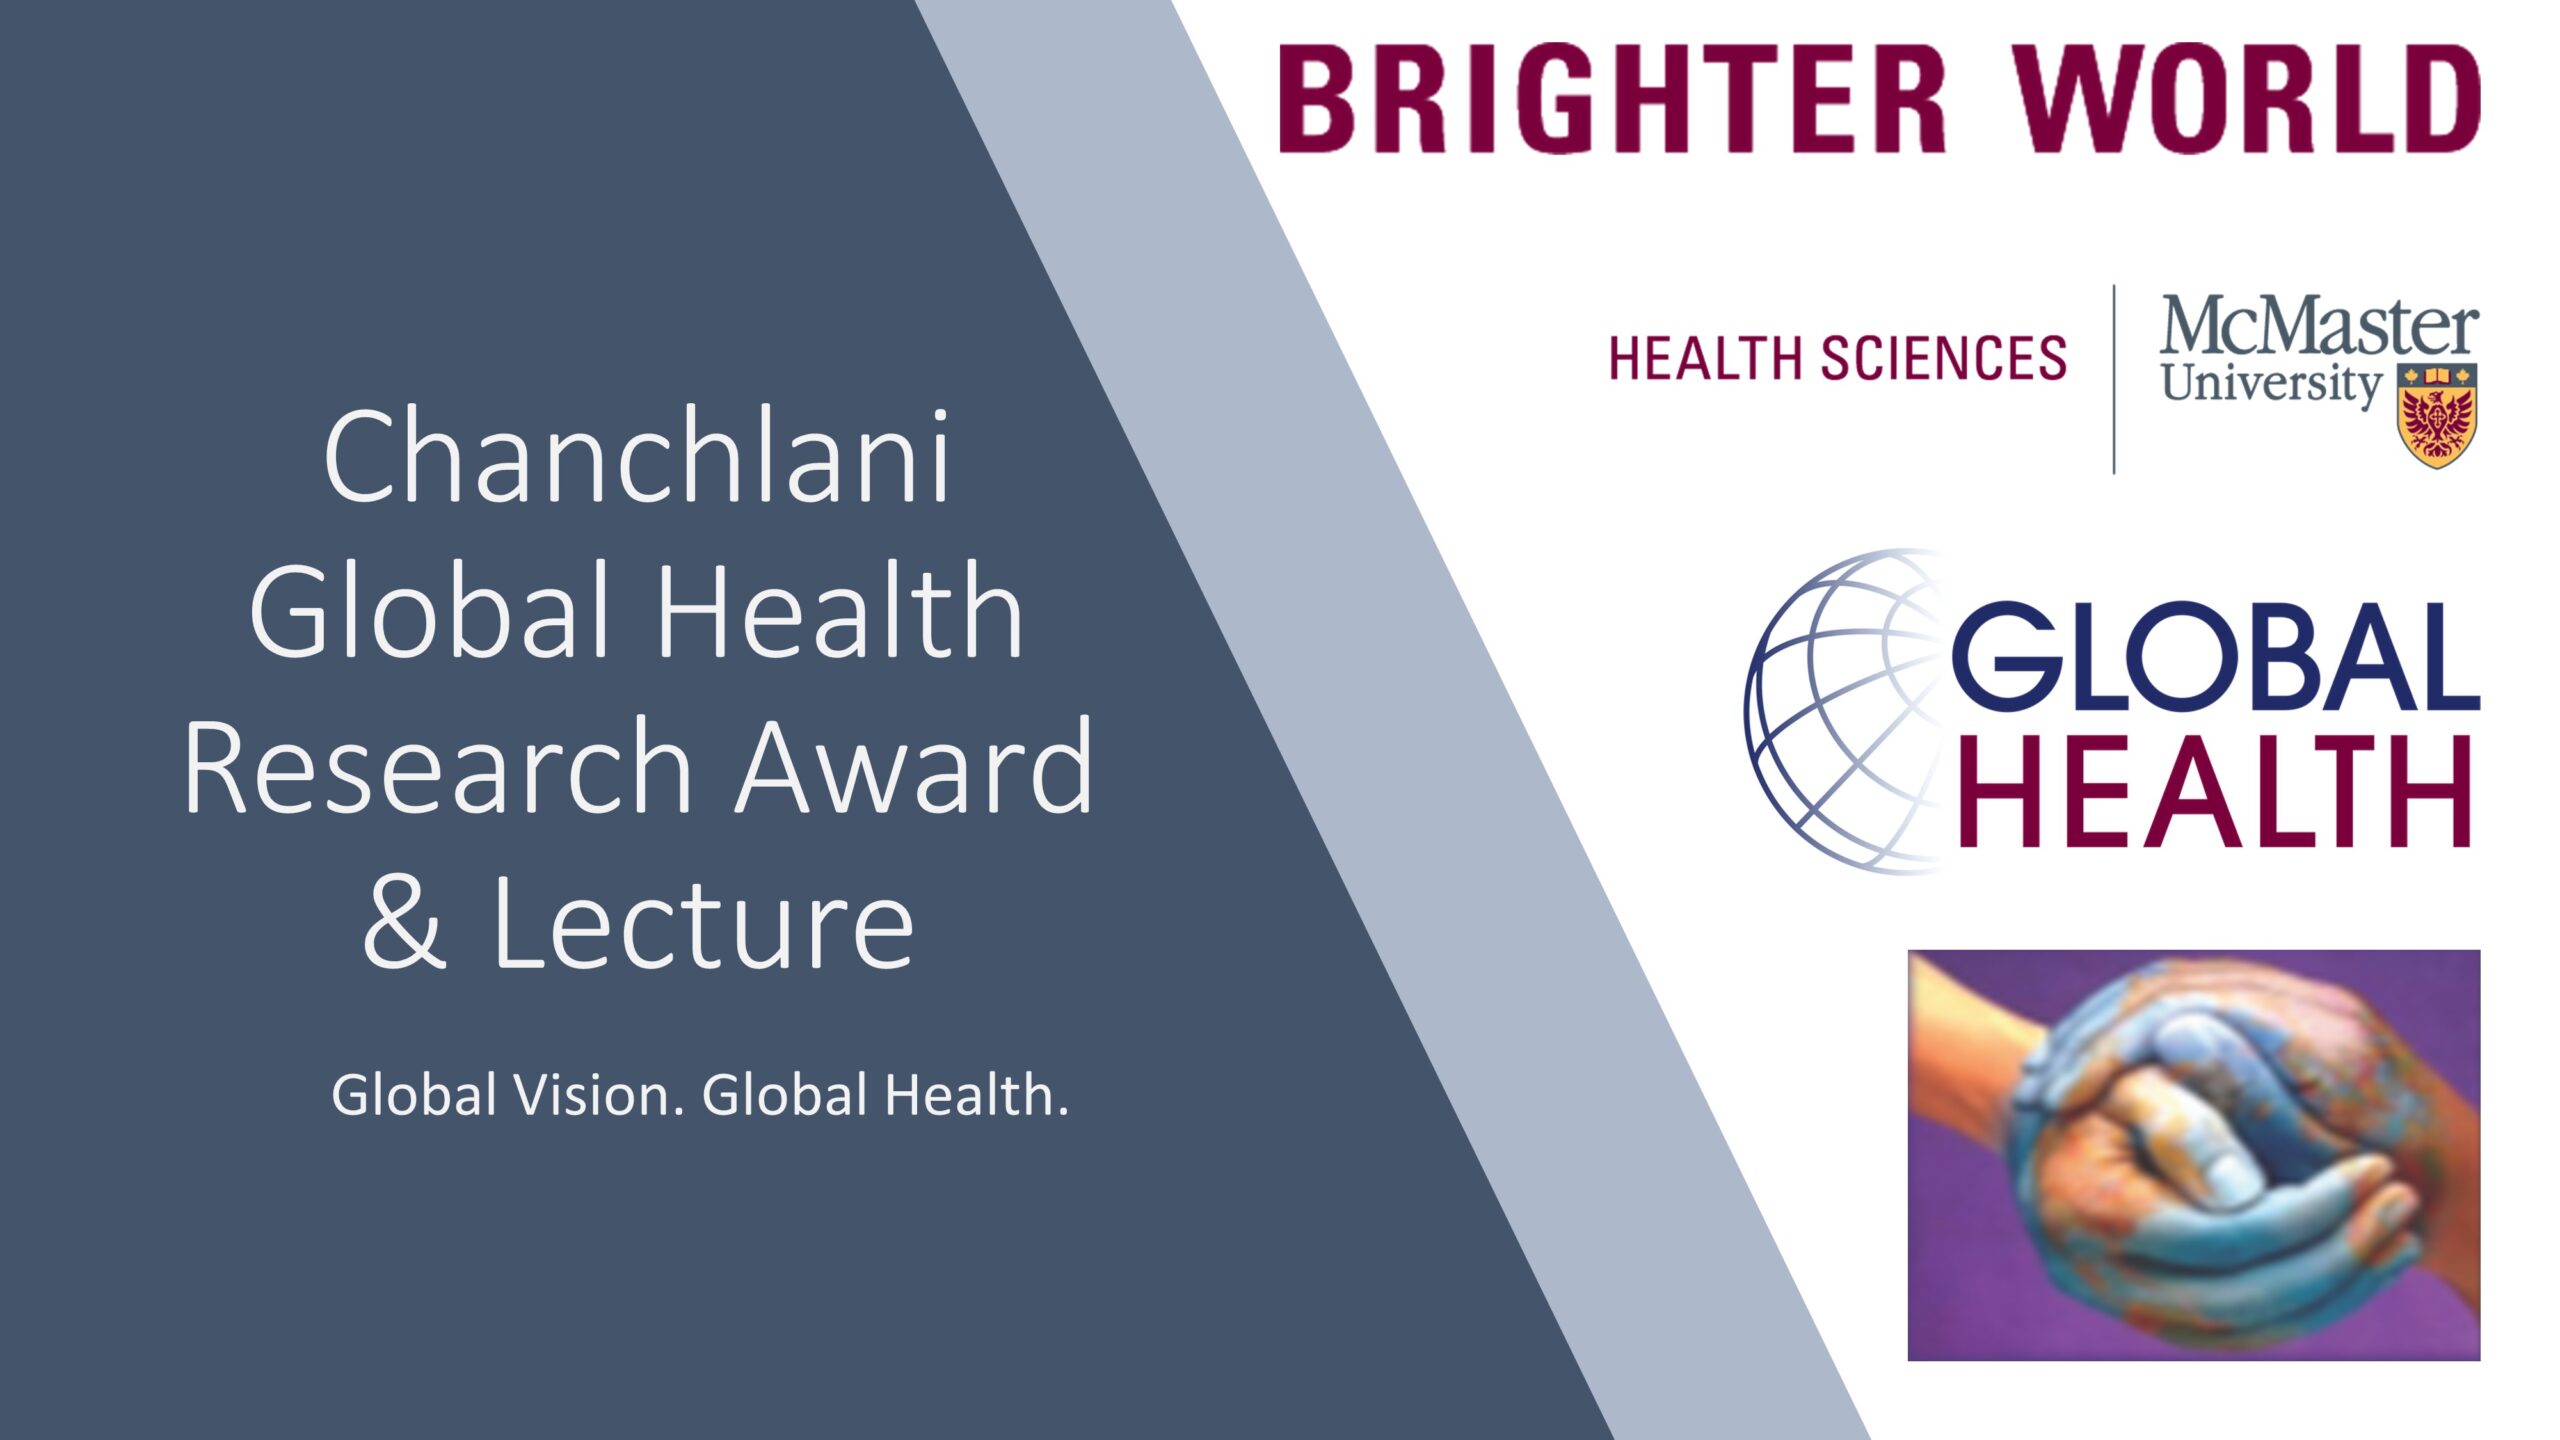 Chanchlani Global Health Research Award & Lecture: Global Vision. Global Health.